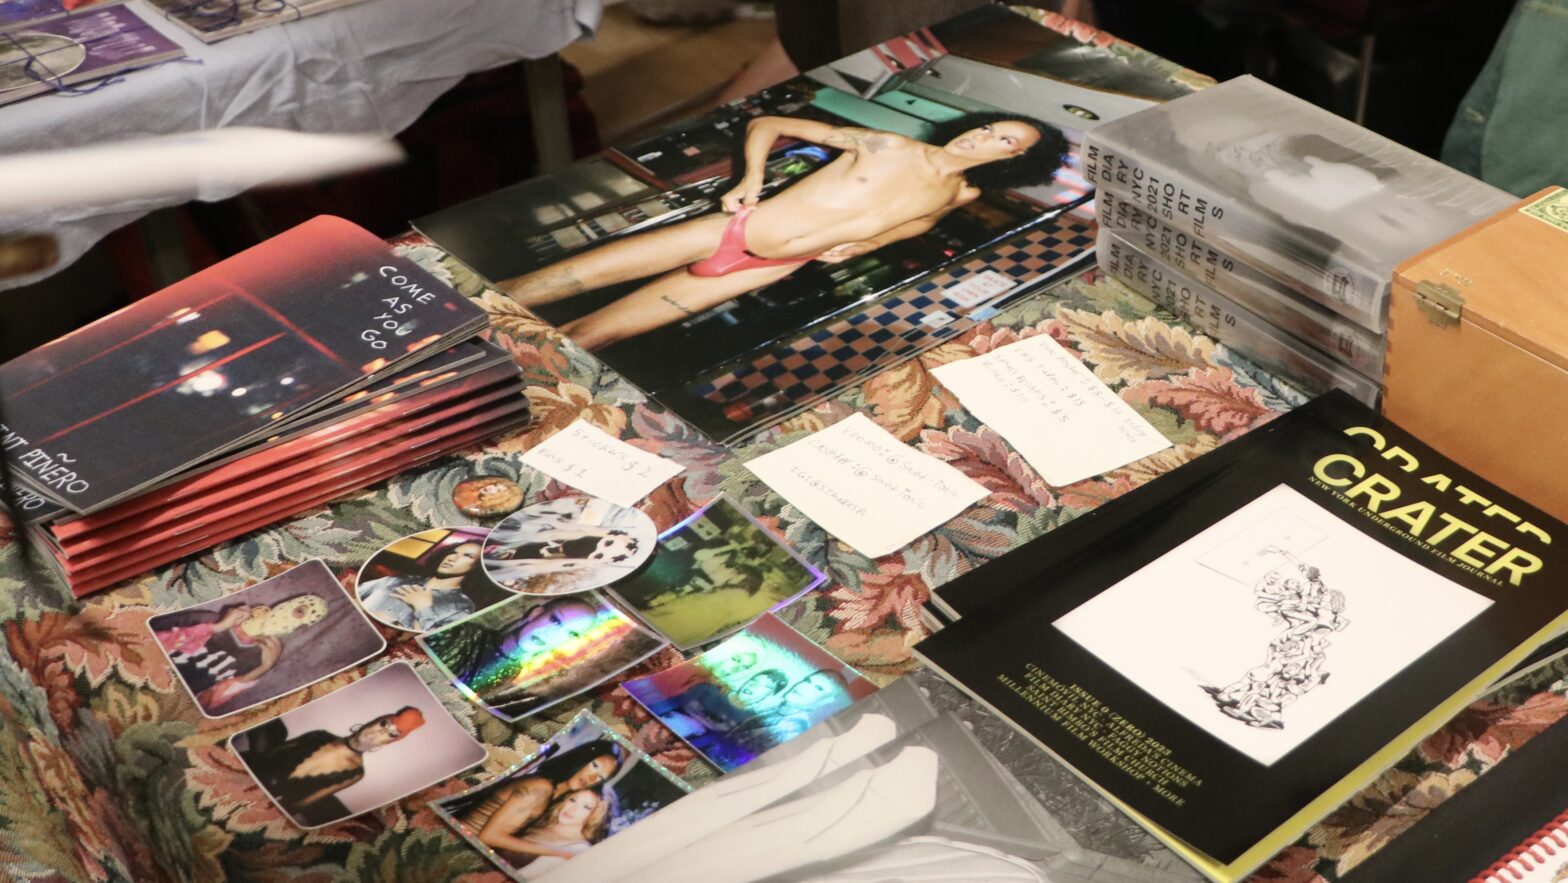 Zines, stickers, booklets, and posters stacked on a floral print display table.